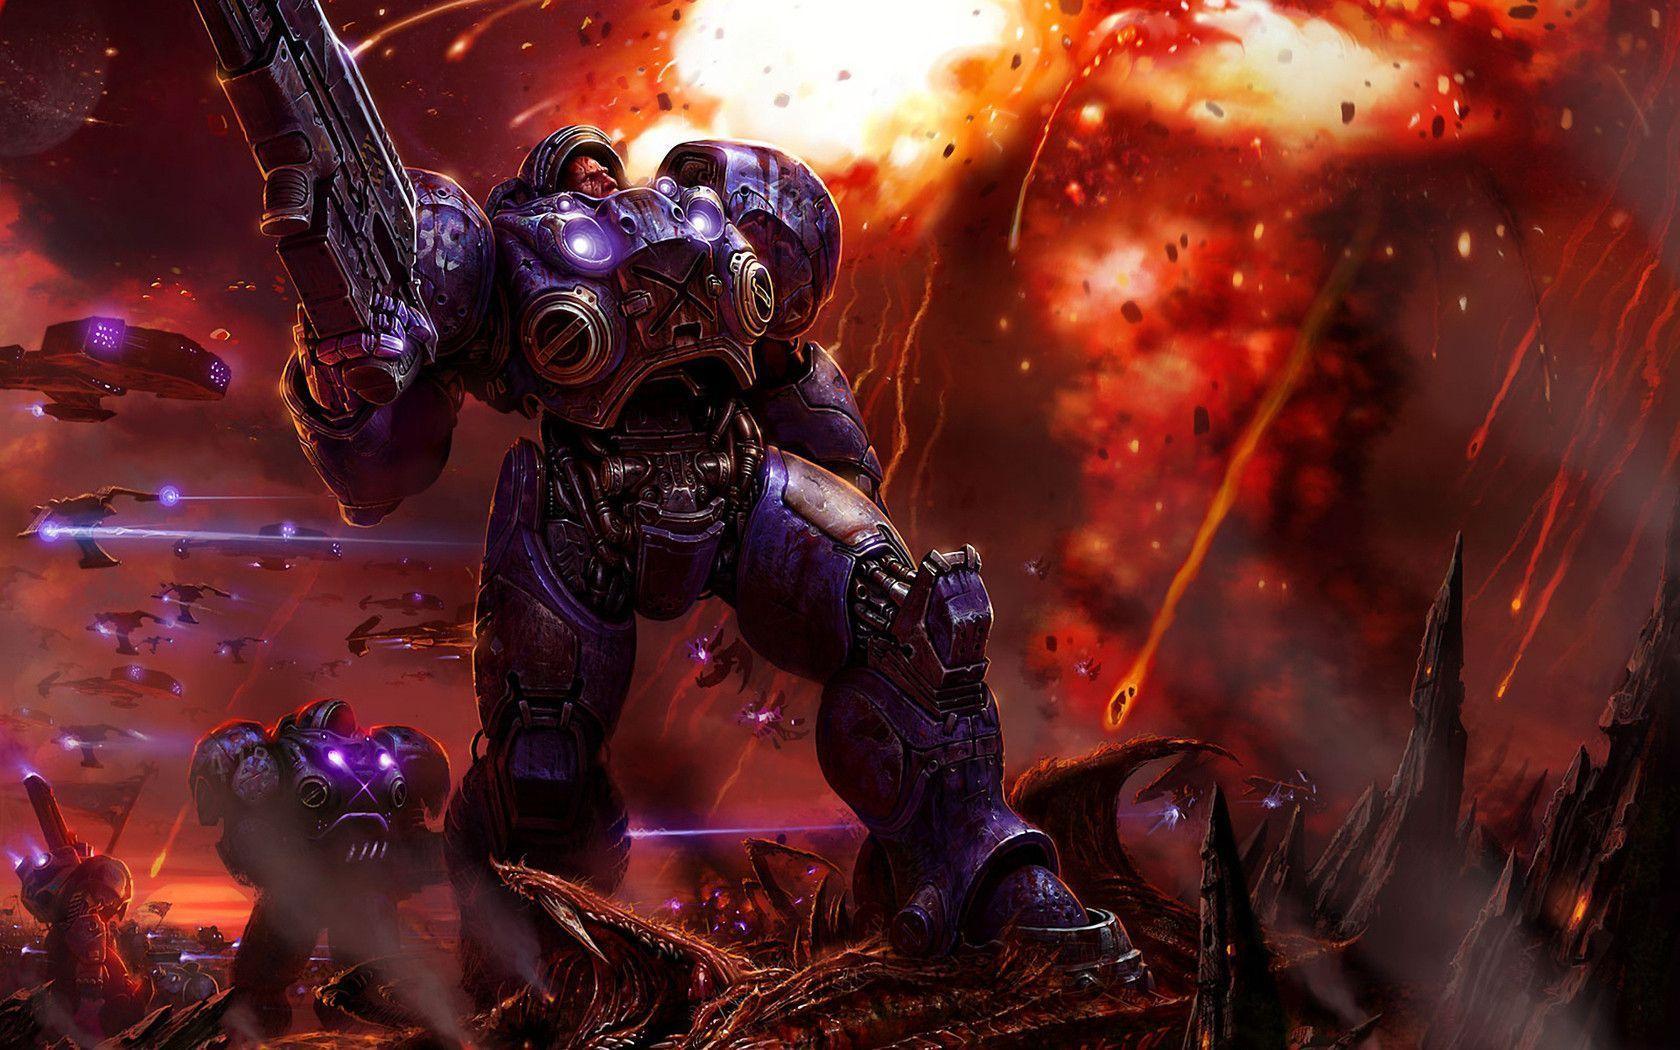 Starcraft 2 Wallpaper, infantry weapons, armor, shots, explosion